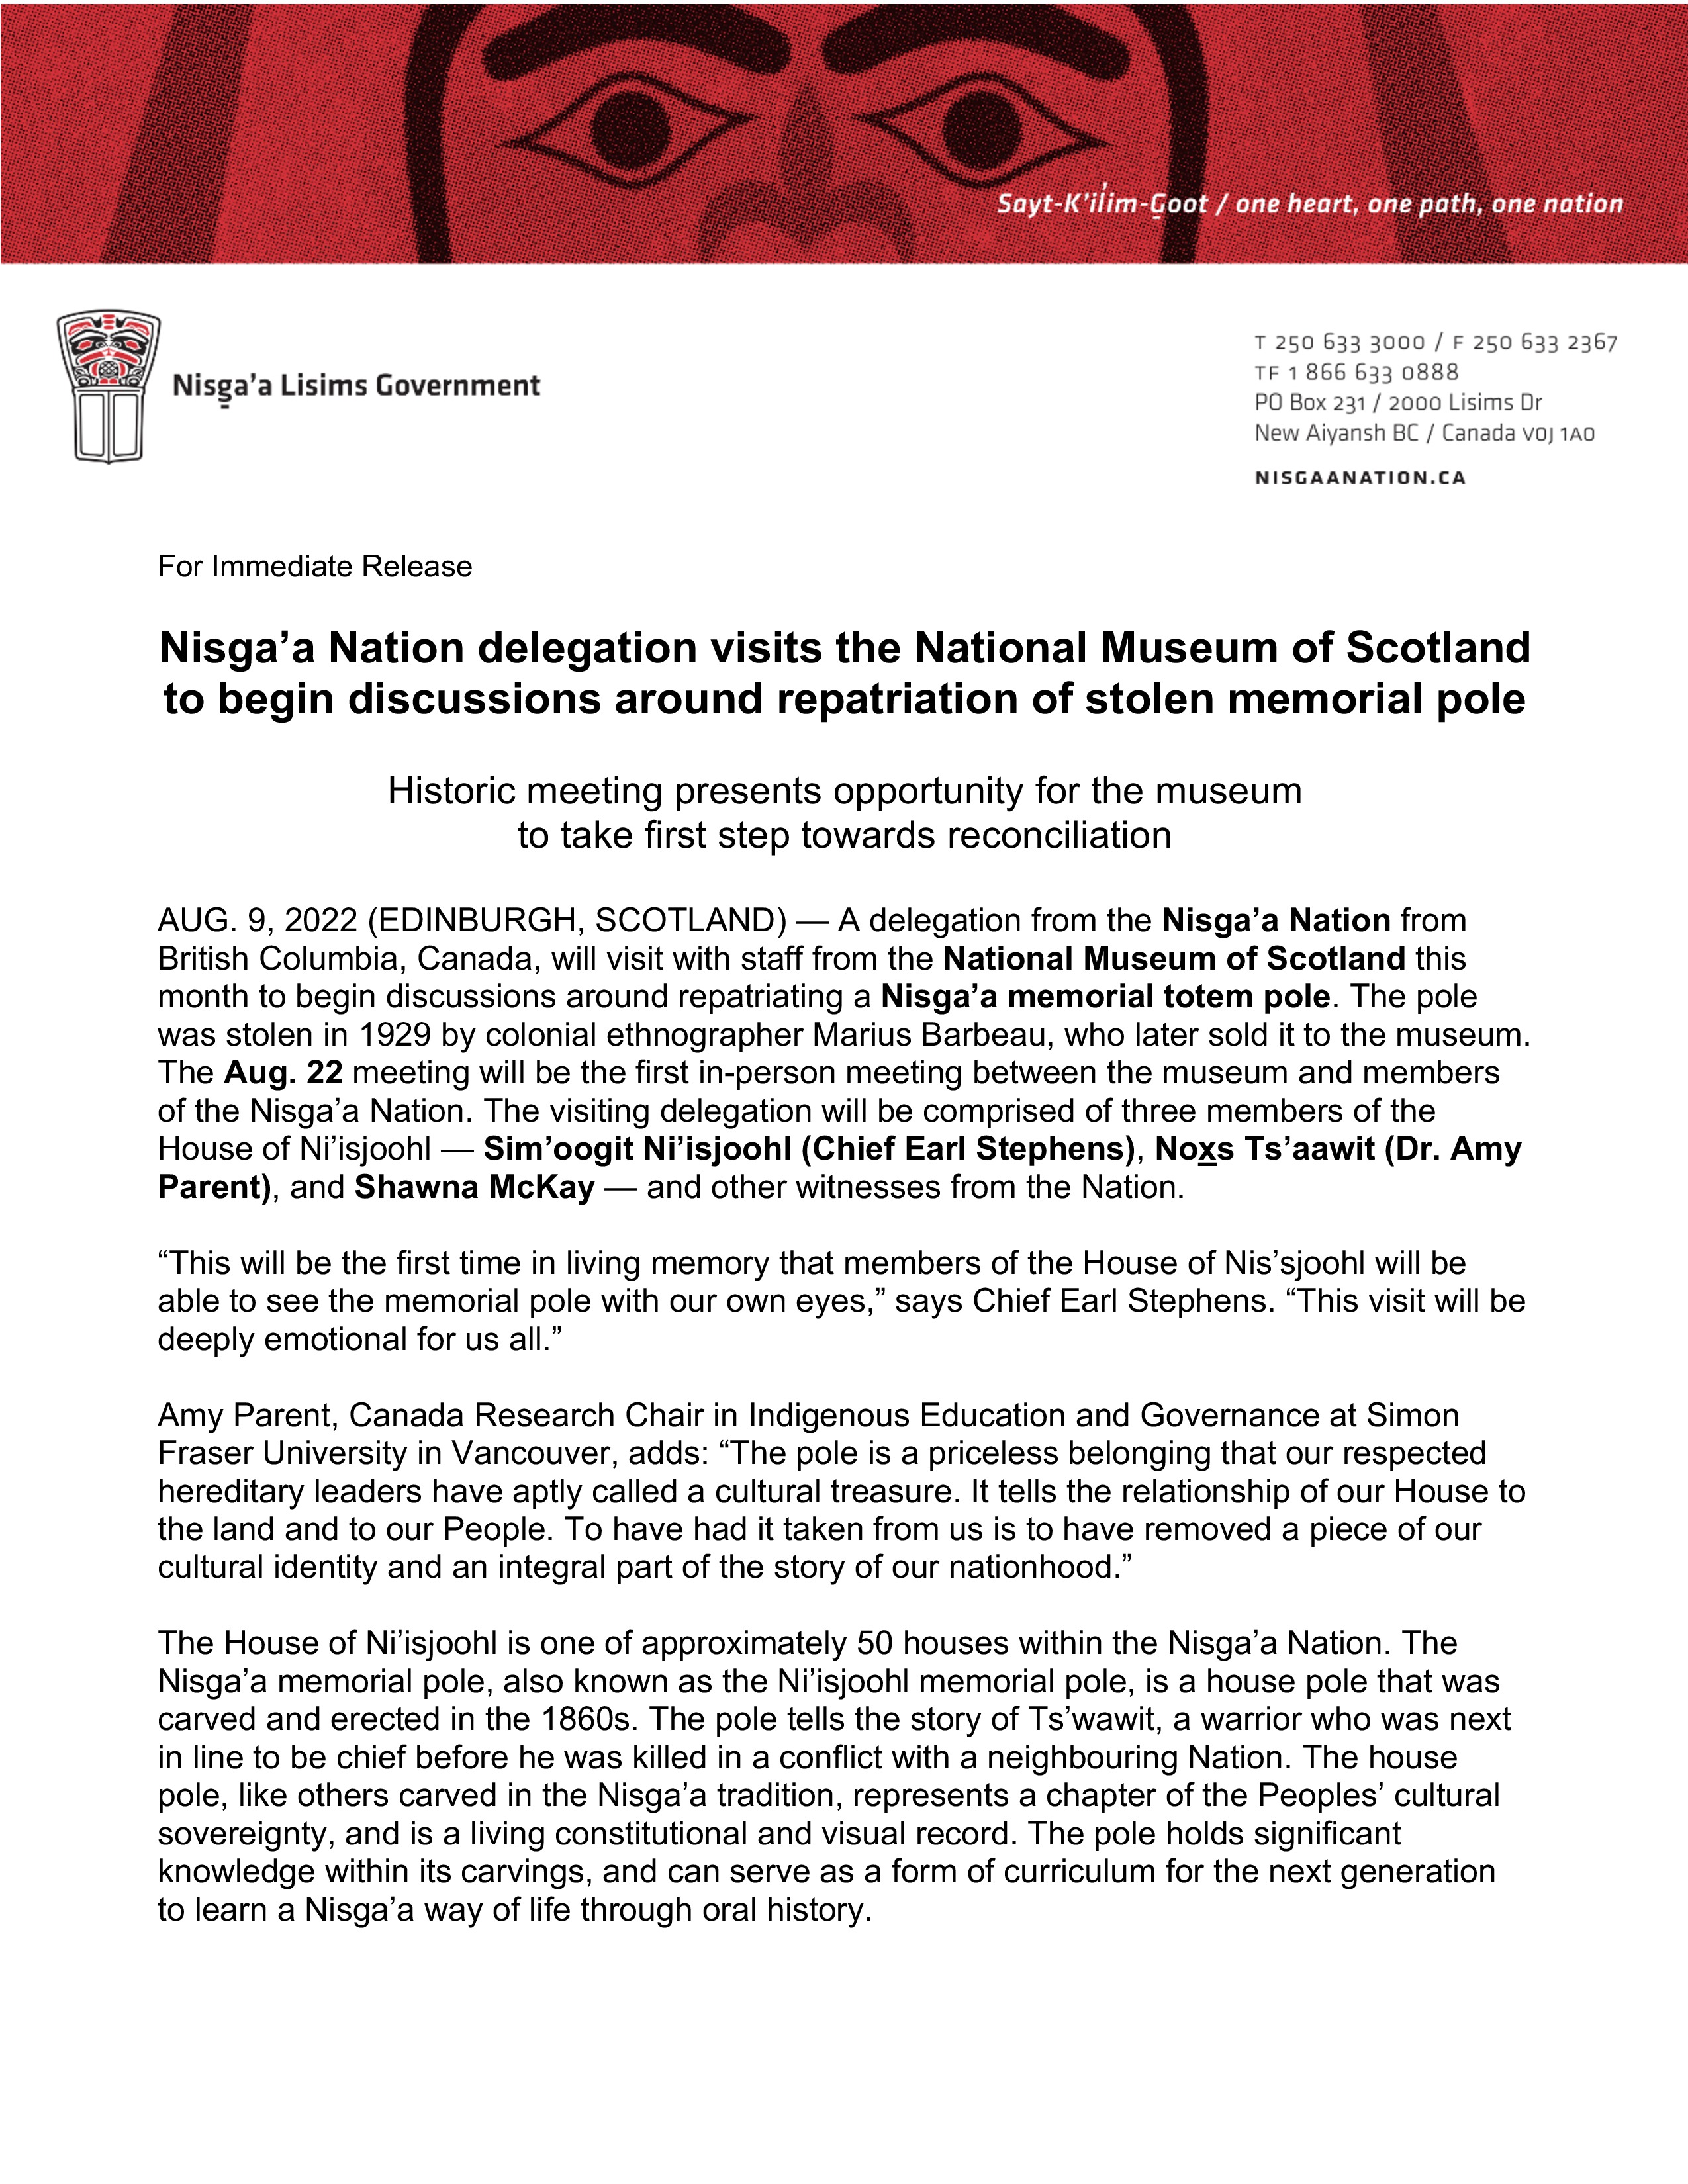 Press Release: Nisga’a Nation delegation visits the National Museum of Scotland to begin discussions around repatriation of stolen memorial pole. 1/2